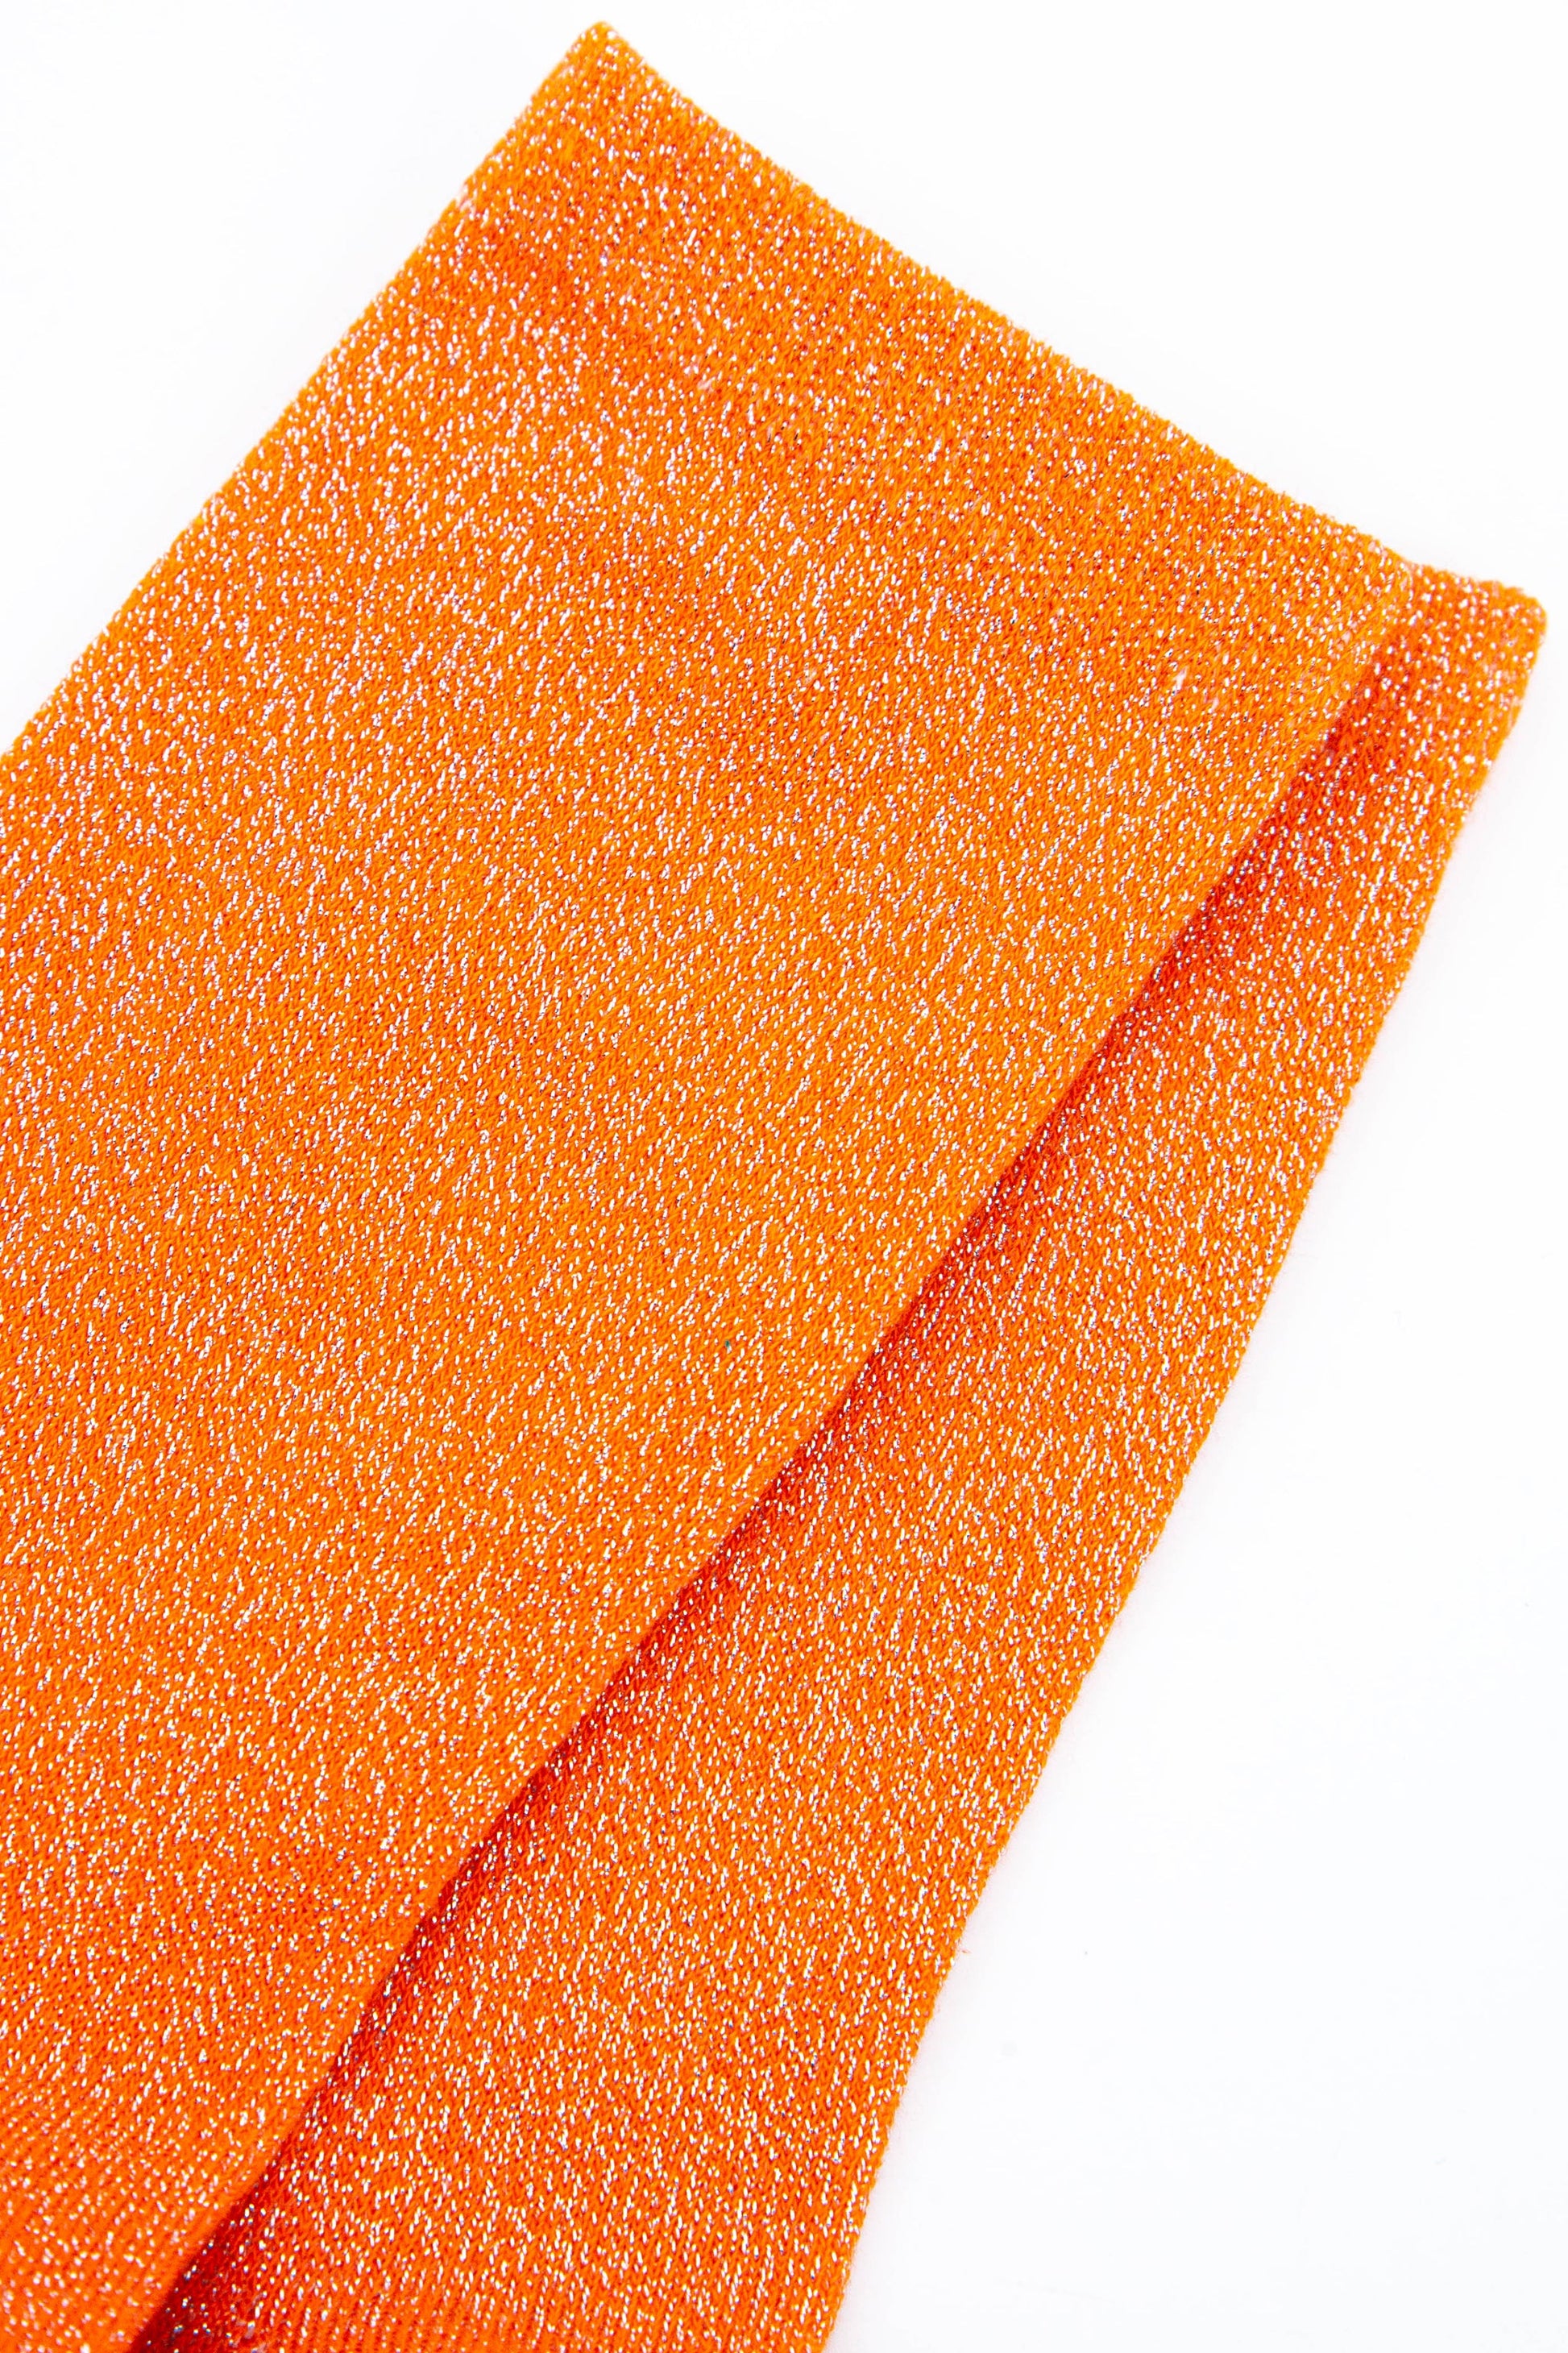 close up of the orange glitter socks showing the silver sparkly glitter material